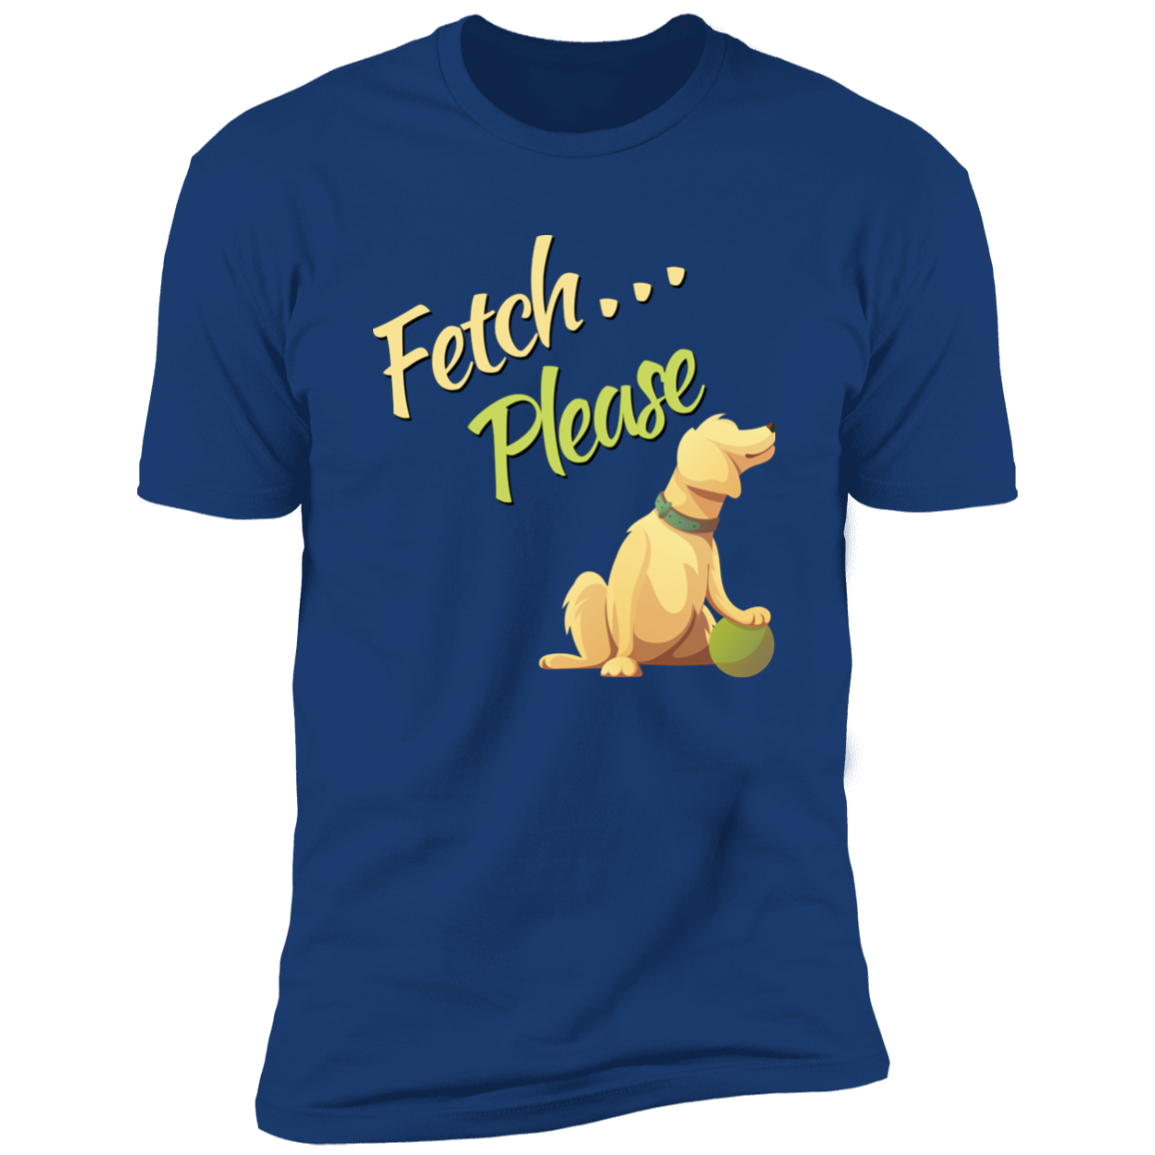 Fetch Please funny dog t-shirt, funny dog shirt for humans, in royal blue